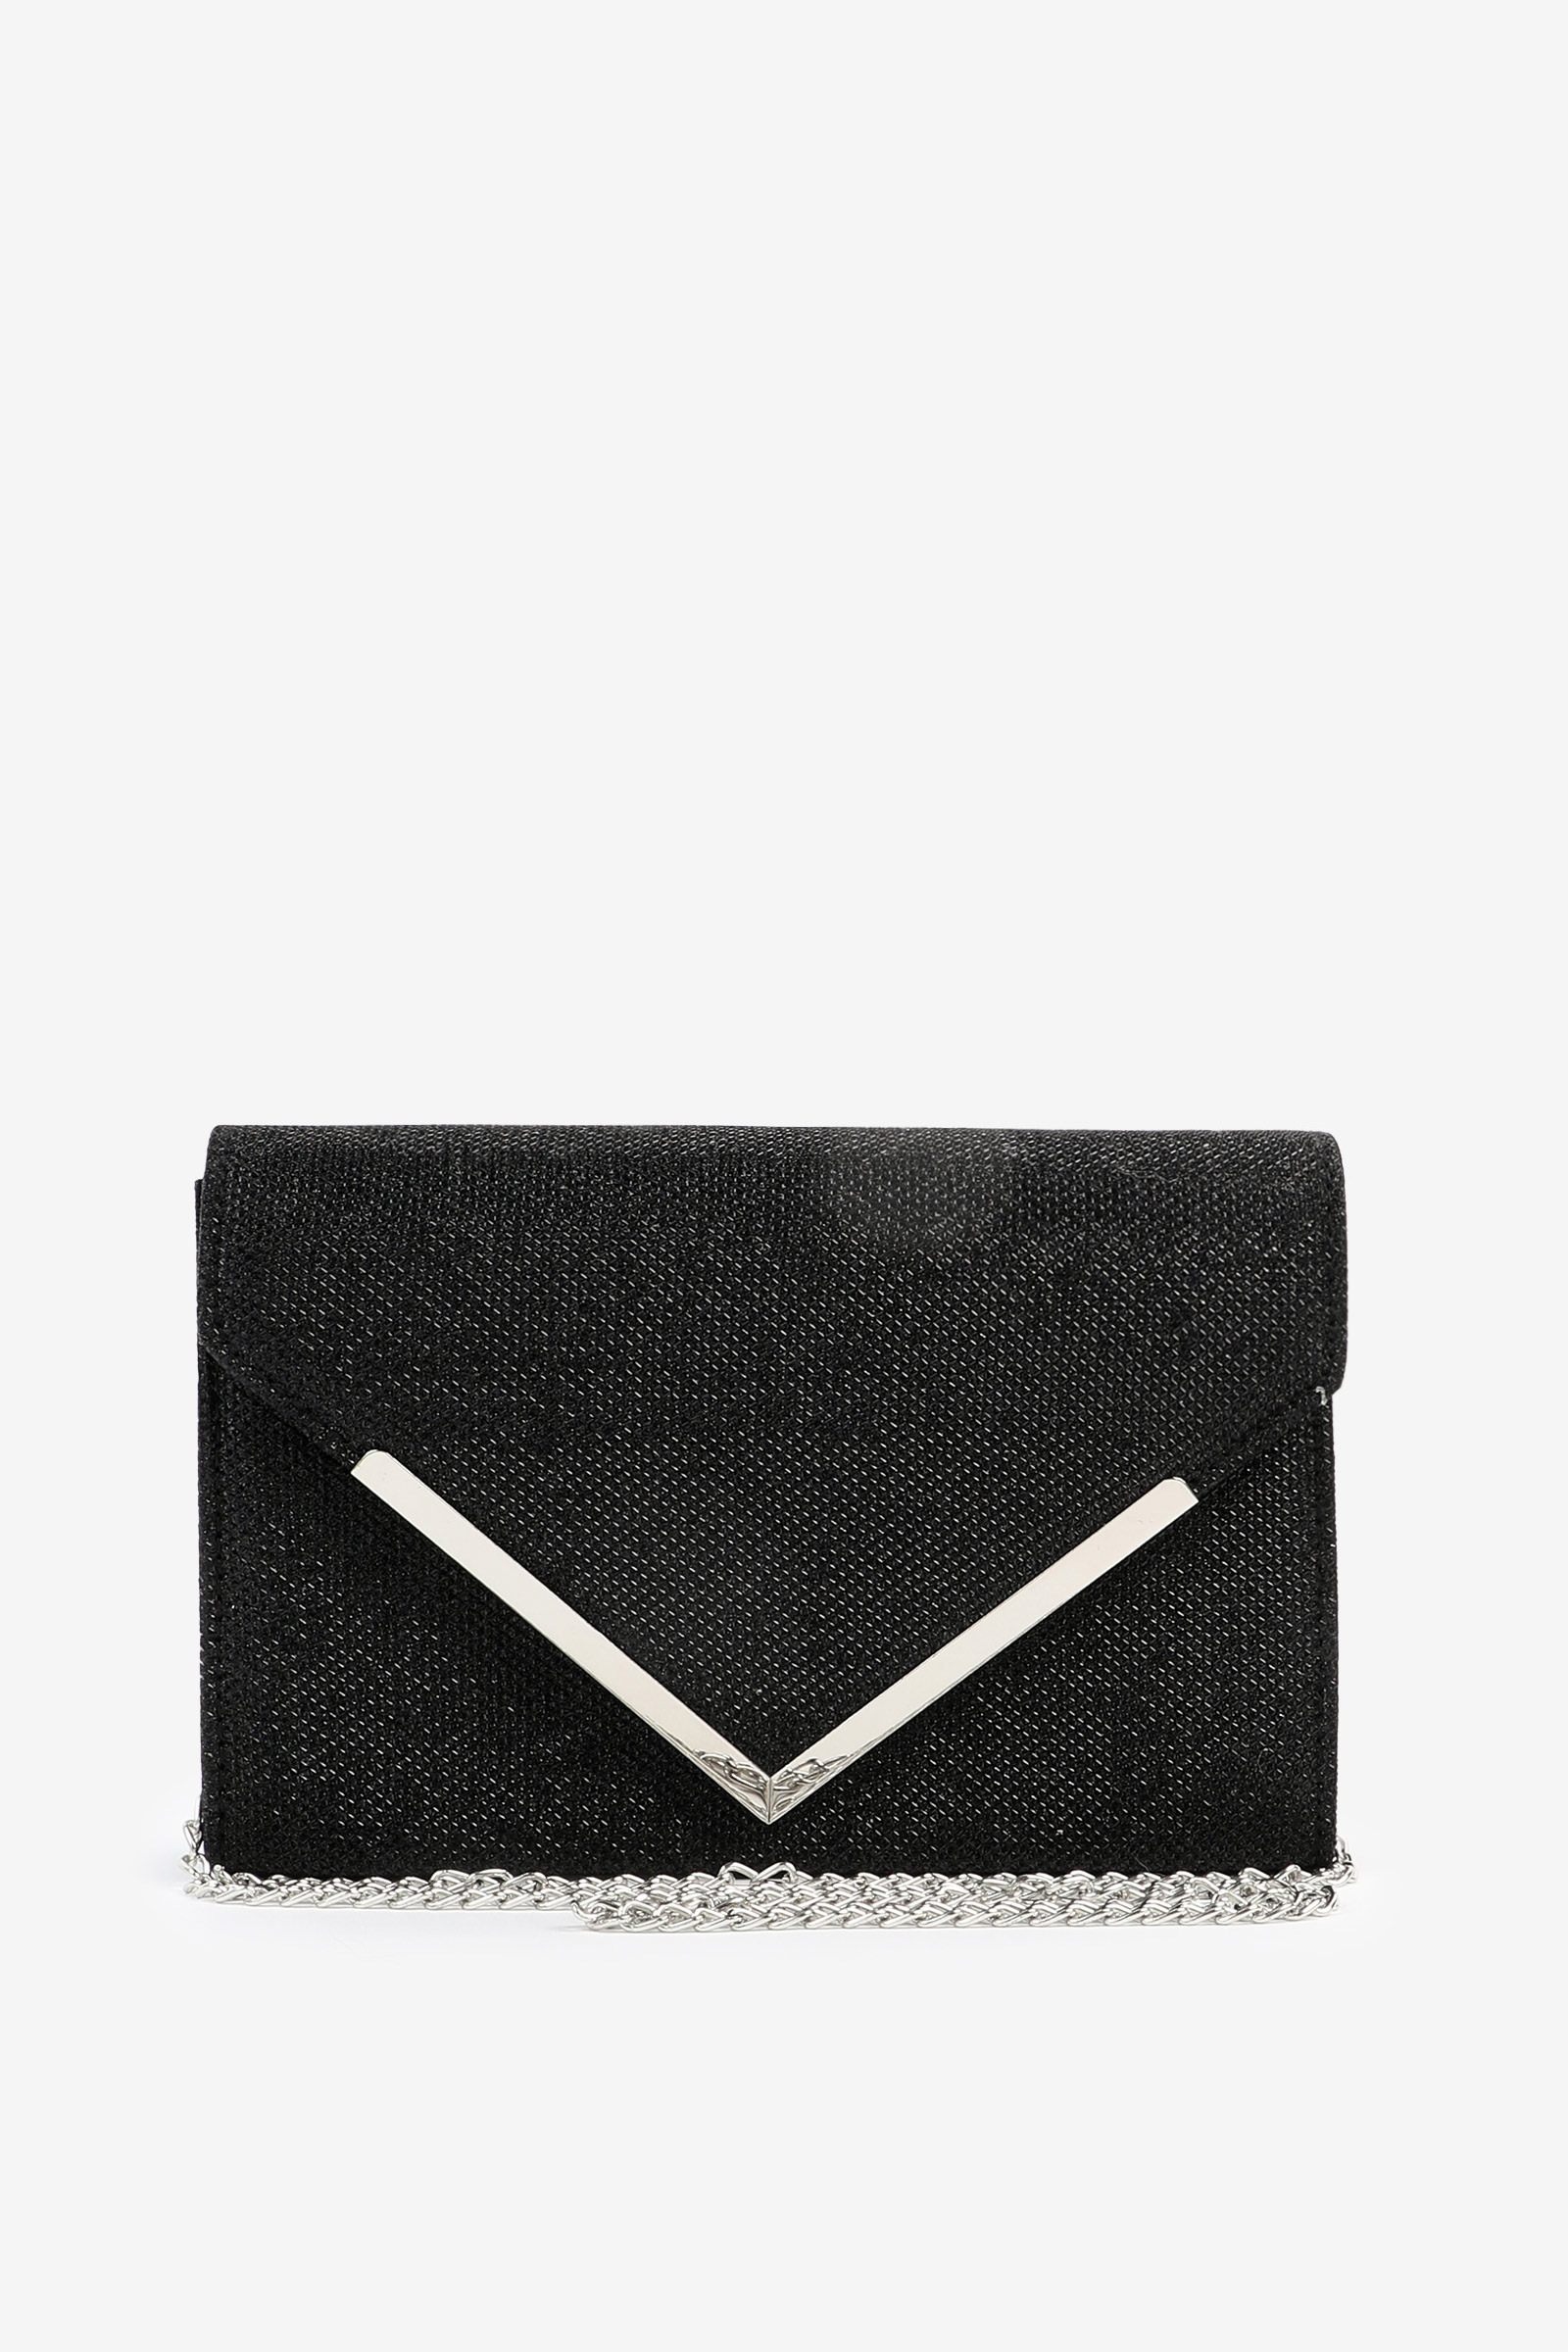 Ardene Envelop Clutch Bag in Black | Faux Leather/Polyester